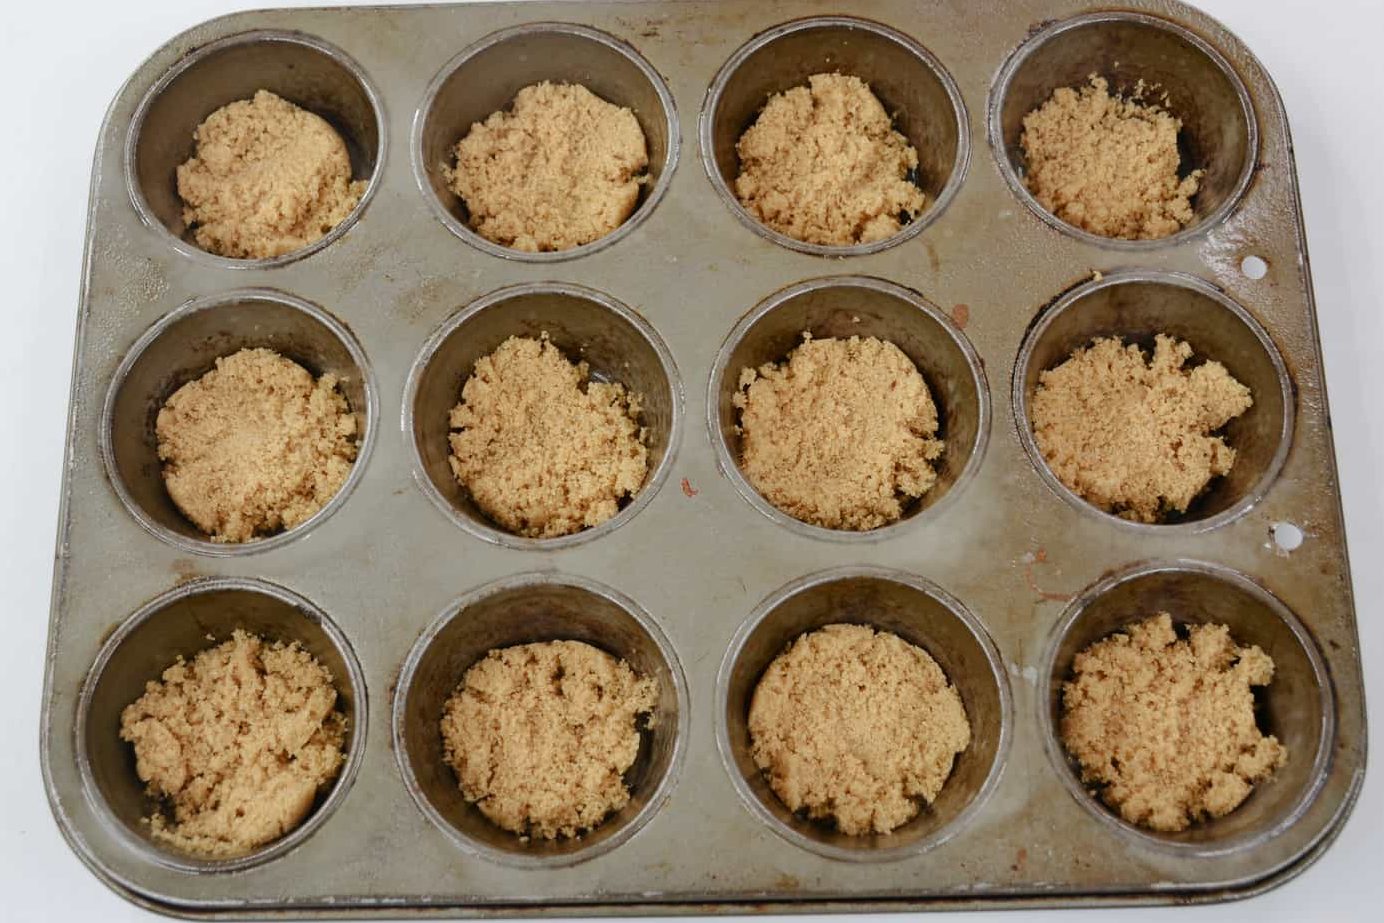 Add one teaspoon of melted butter in each of the muffin cups,